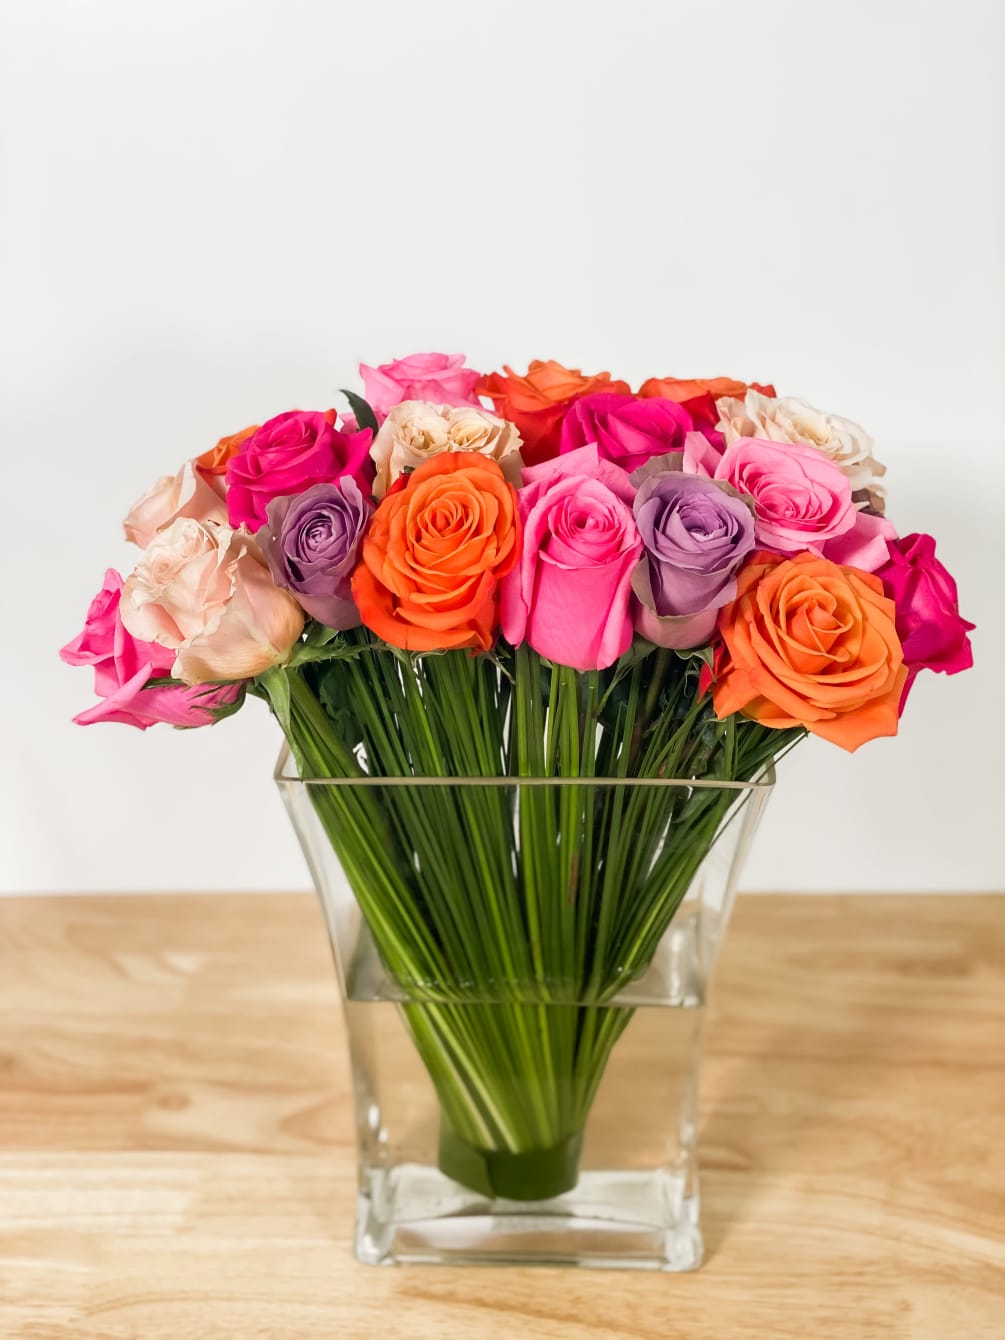 Send the most beautiful rose arrangement from the best florist in the